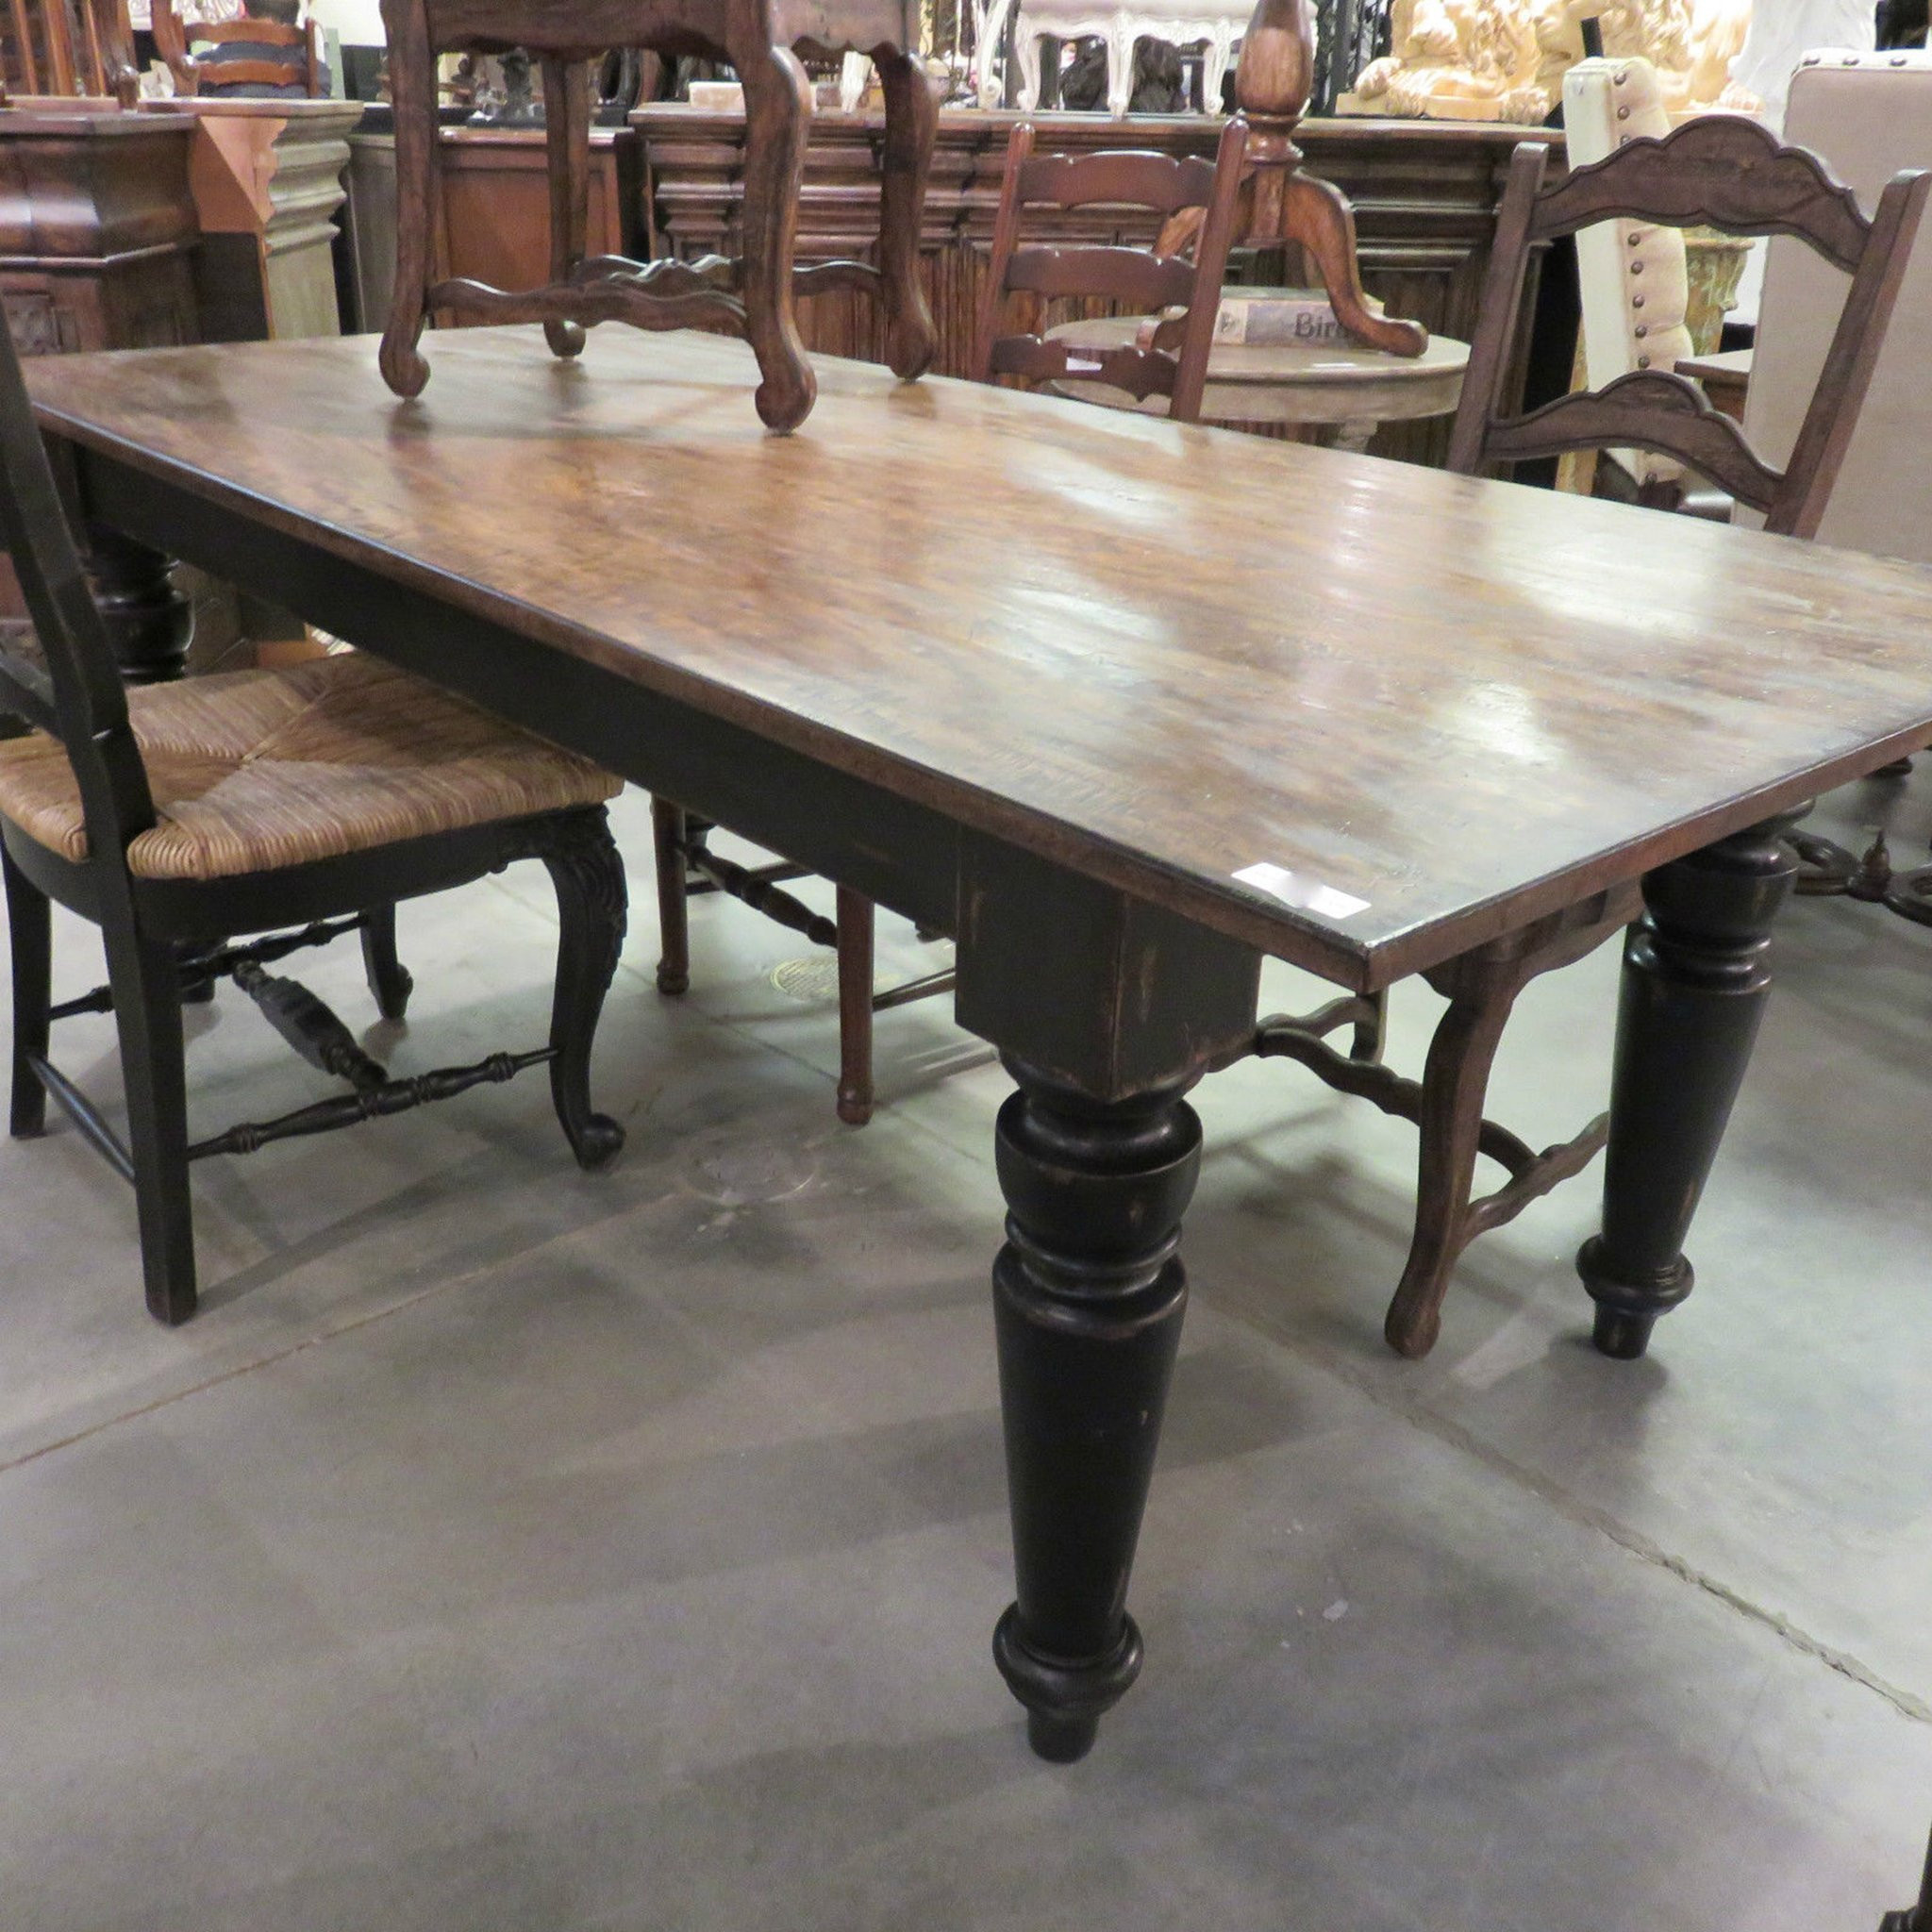 Rustic Farmhouse Kitchen Table
 Rustic Farmhouse Dining Table 72" Black Distressed